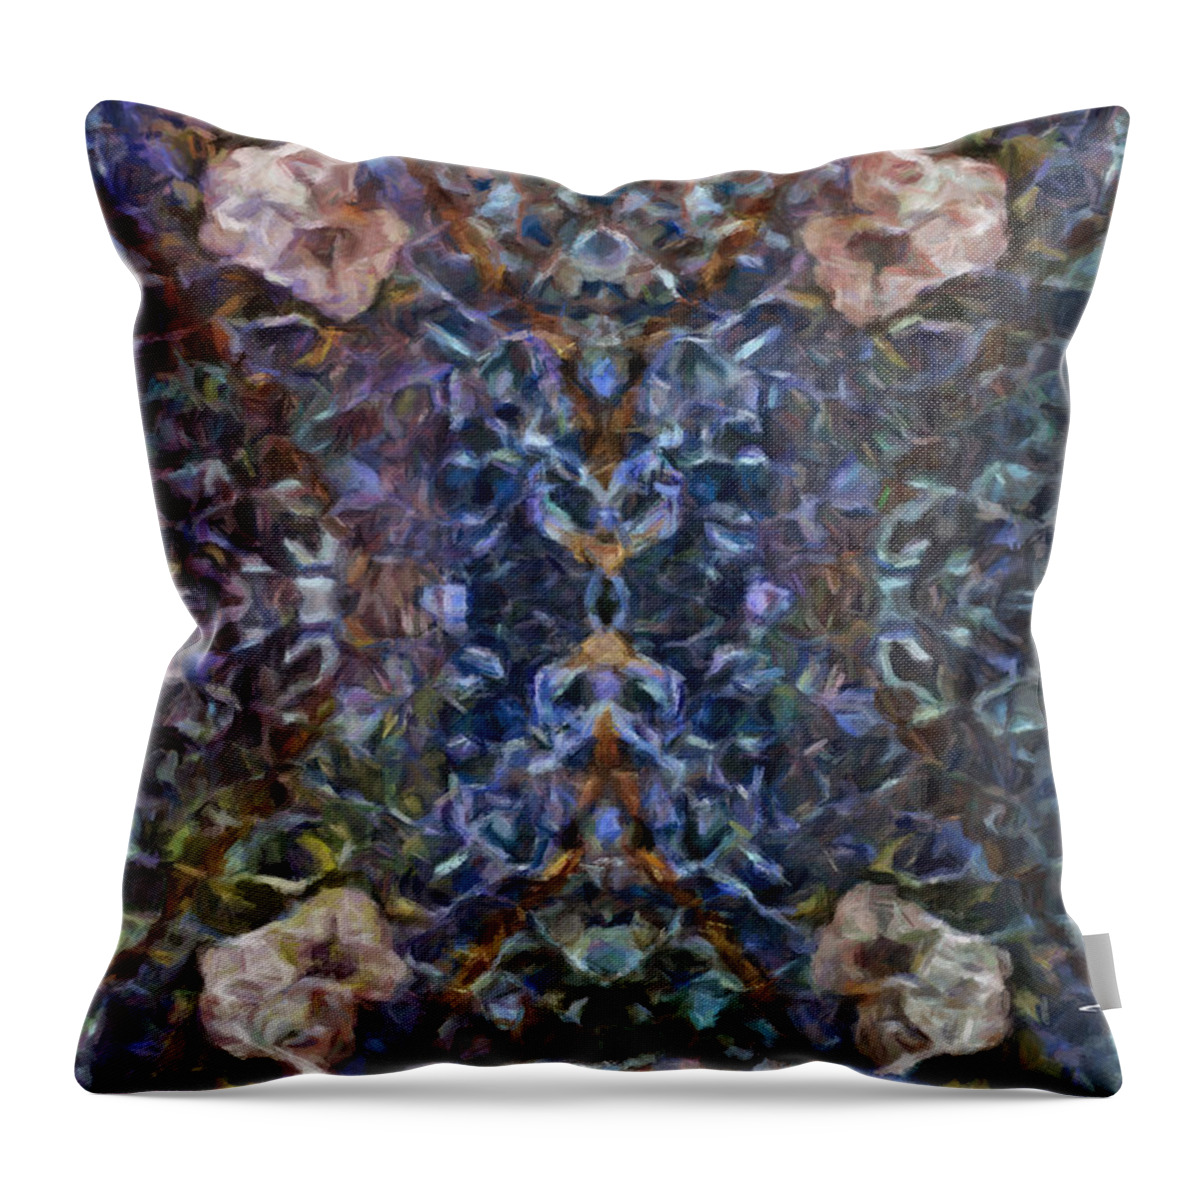  Landscape Throw Pillow featuring the painting Cool Water by Trask Ferrero